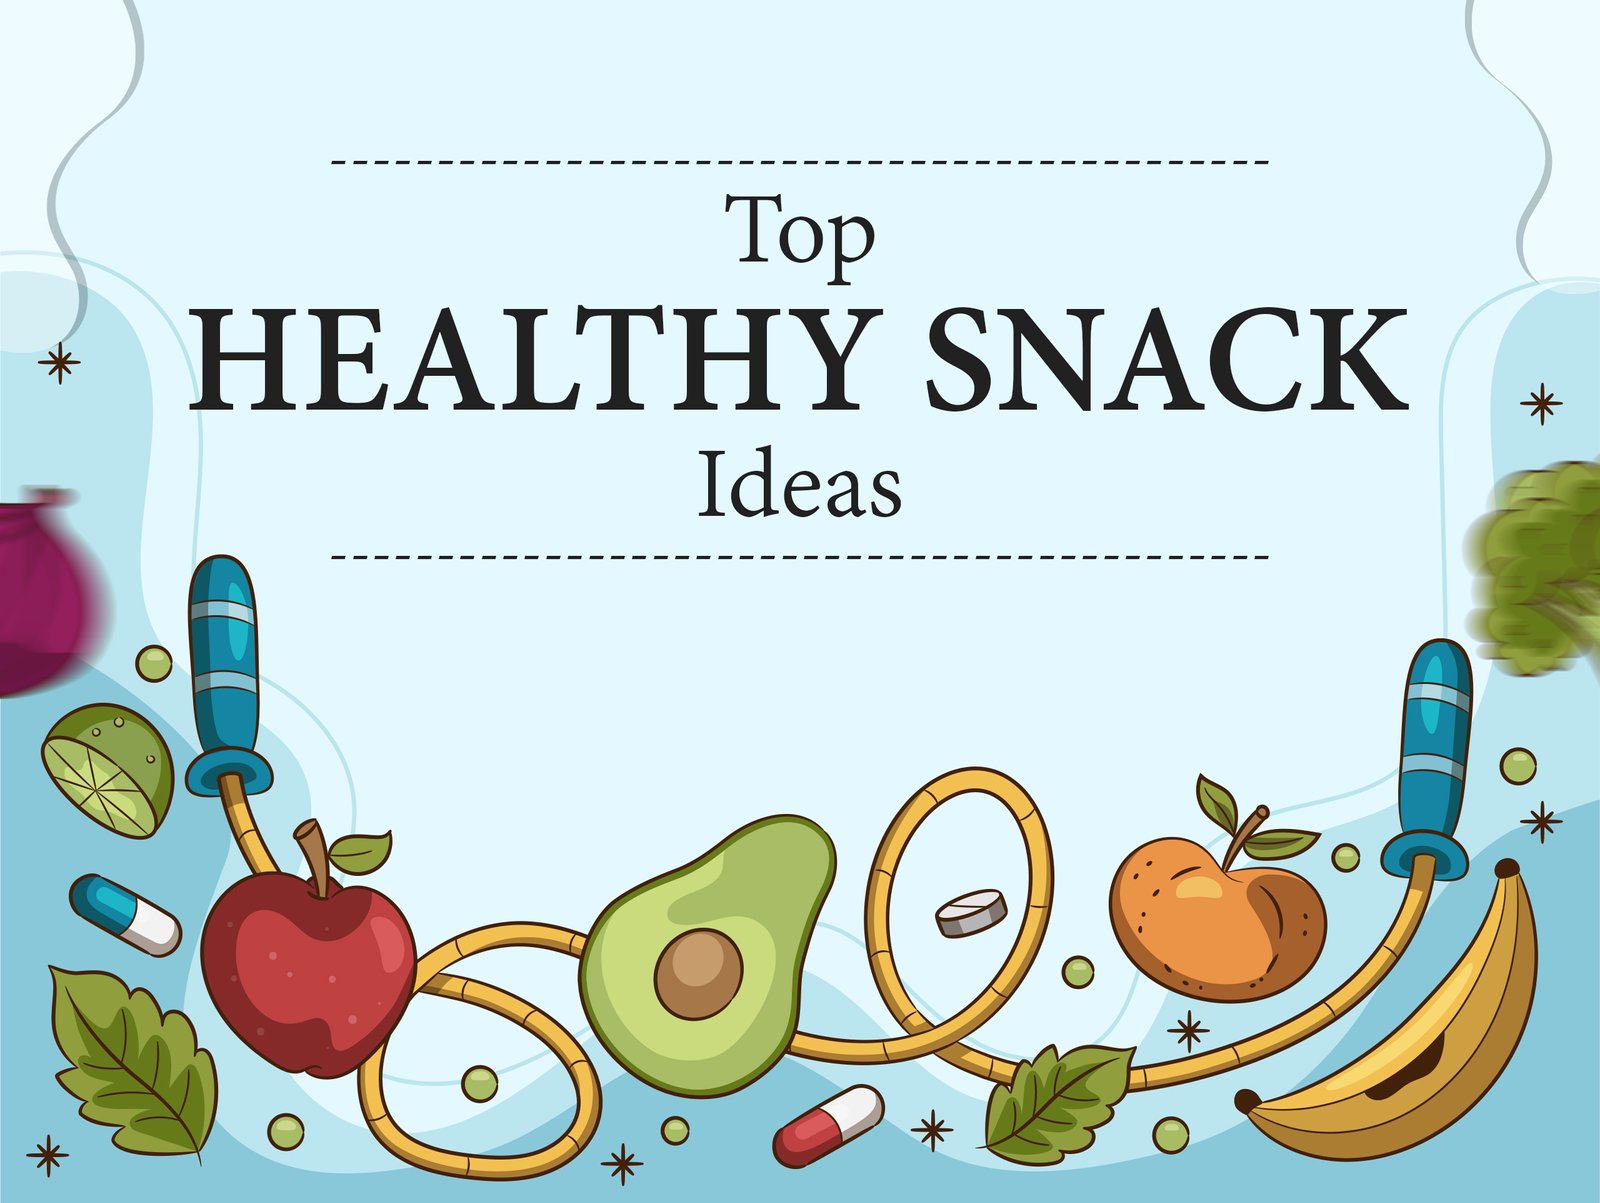 Healthy snack ideas poster